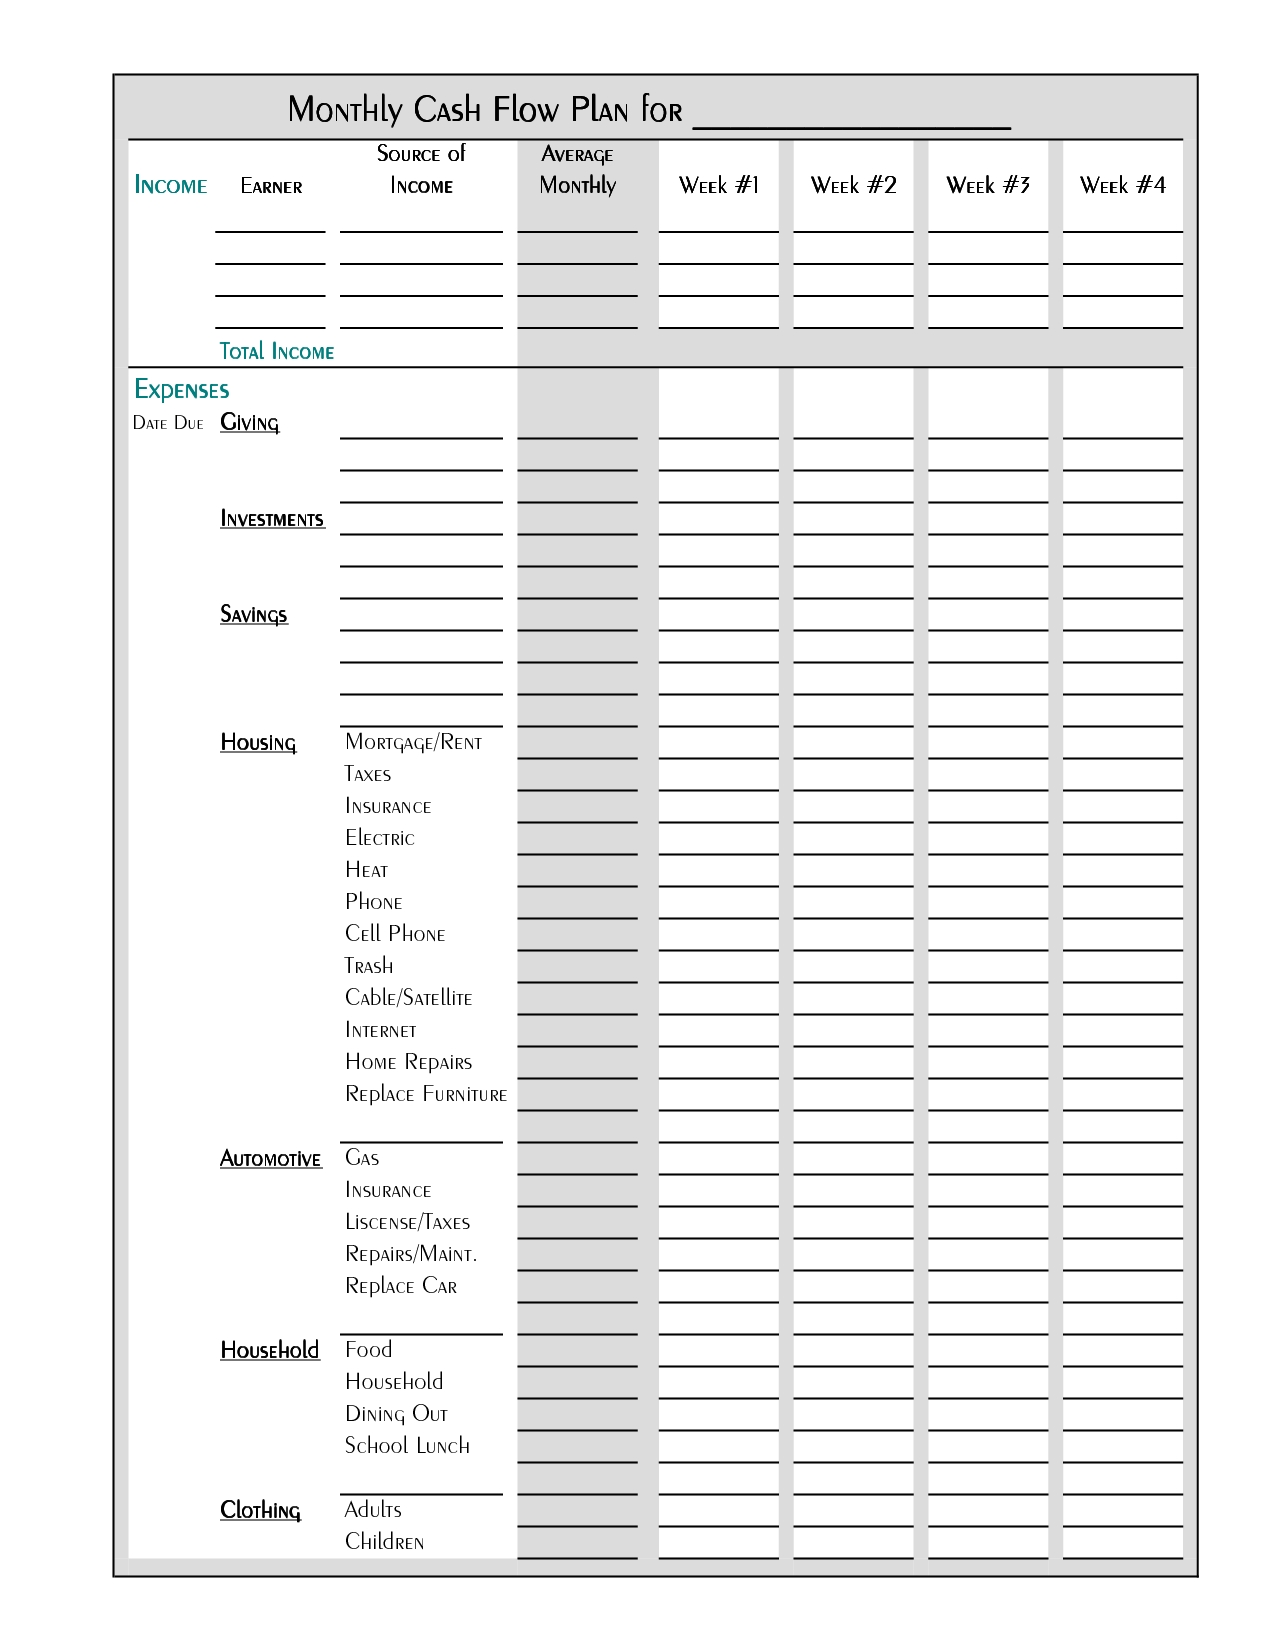 Personal Budget Forms Printable - Yeniscale.co  Free Printable Monthly Household Bills Due Form